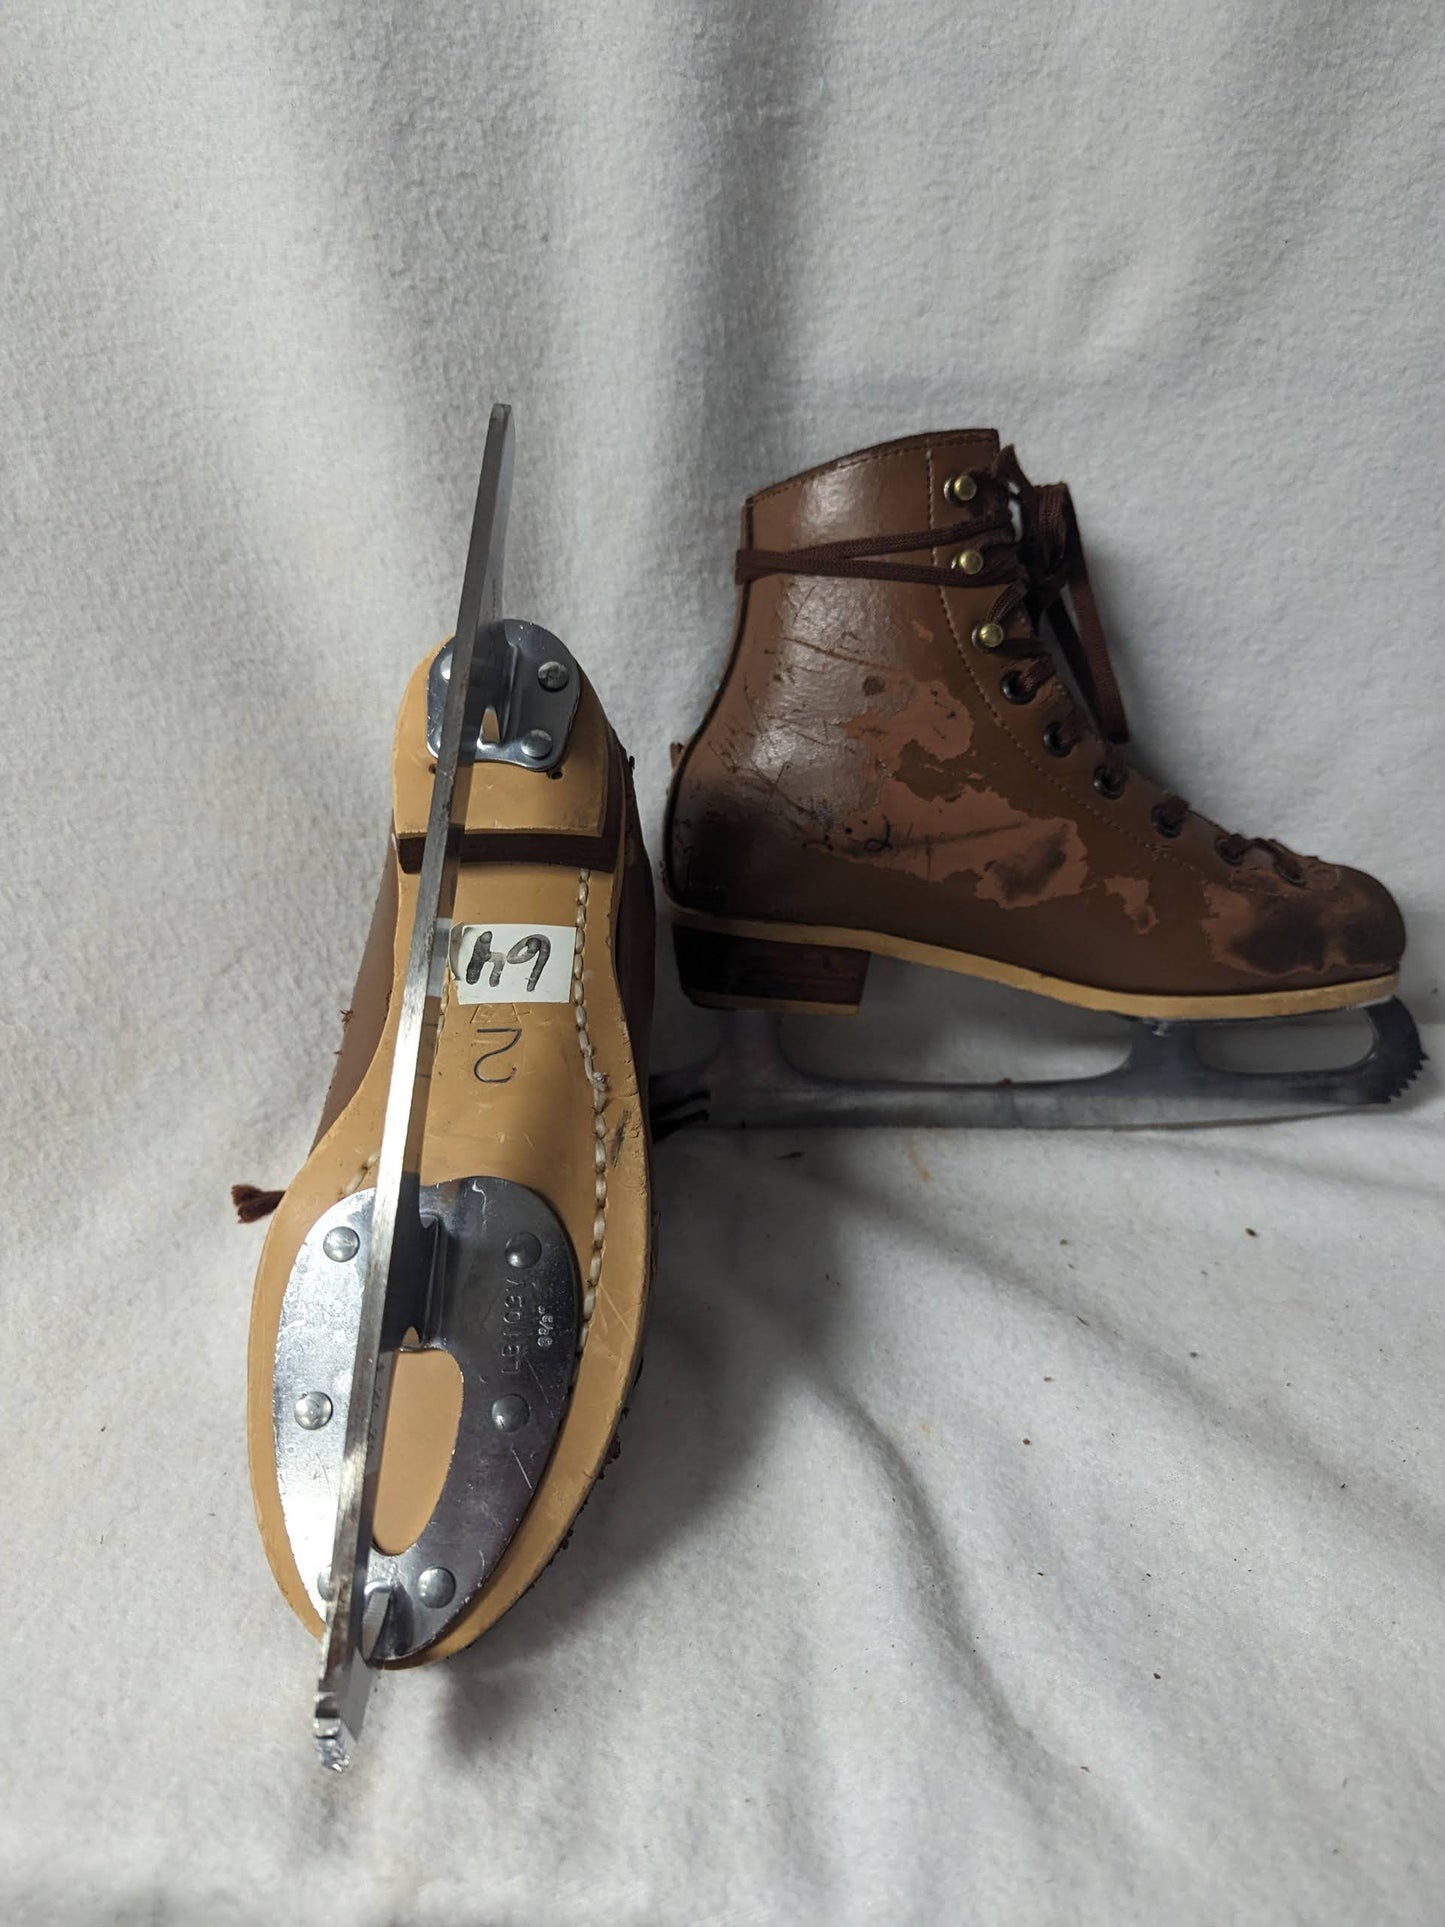 Rink Master Ice Skates Size 2 Color Brown Condition Used